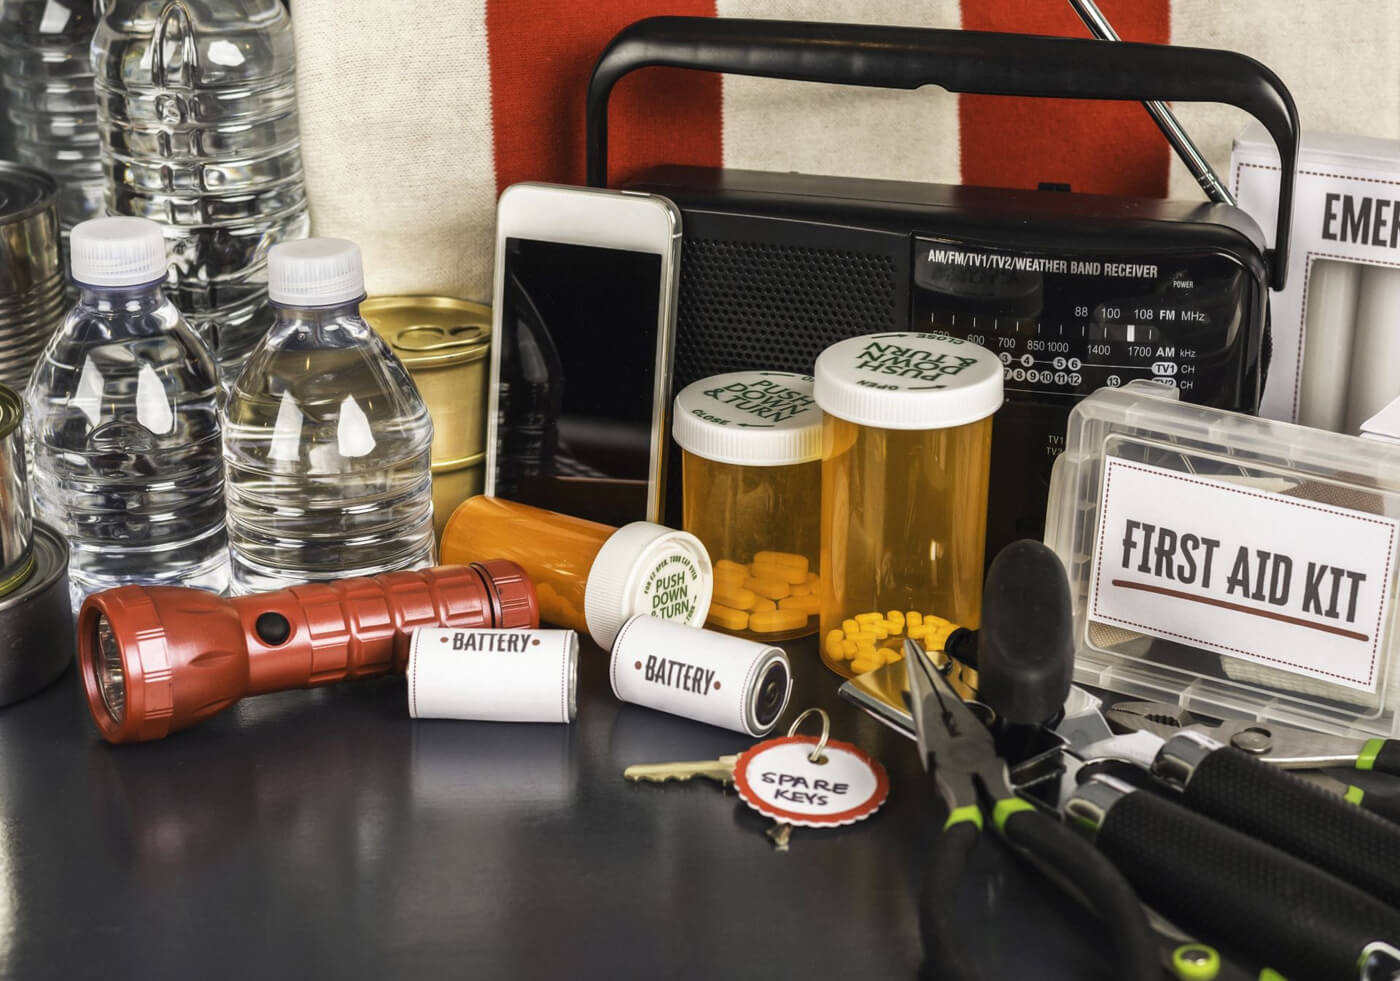 Devices and Accessories for hurricane survival